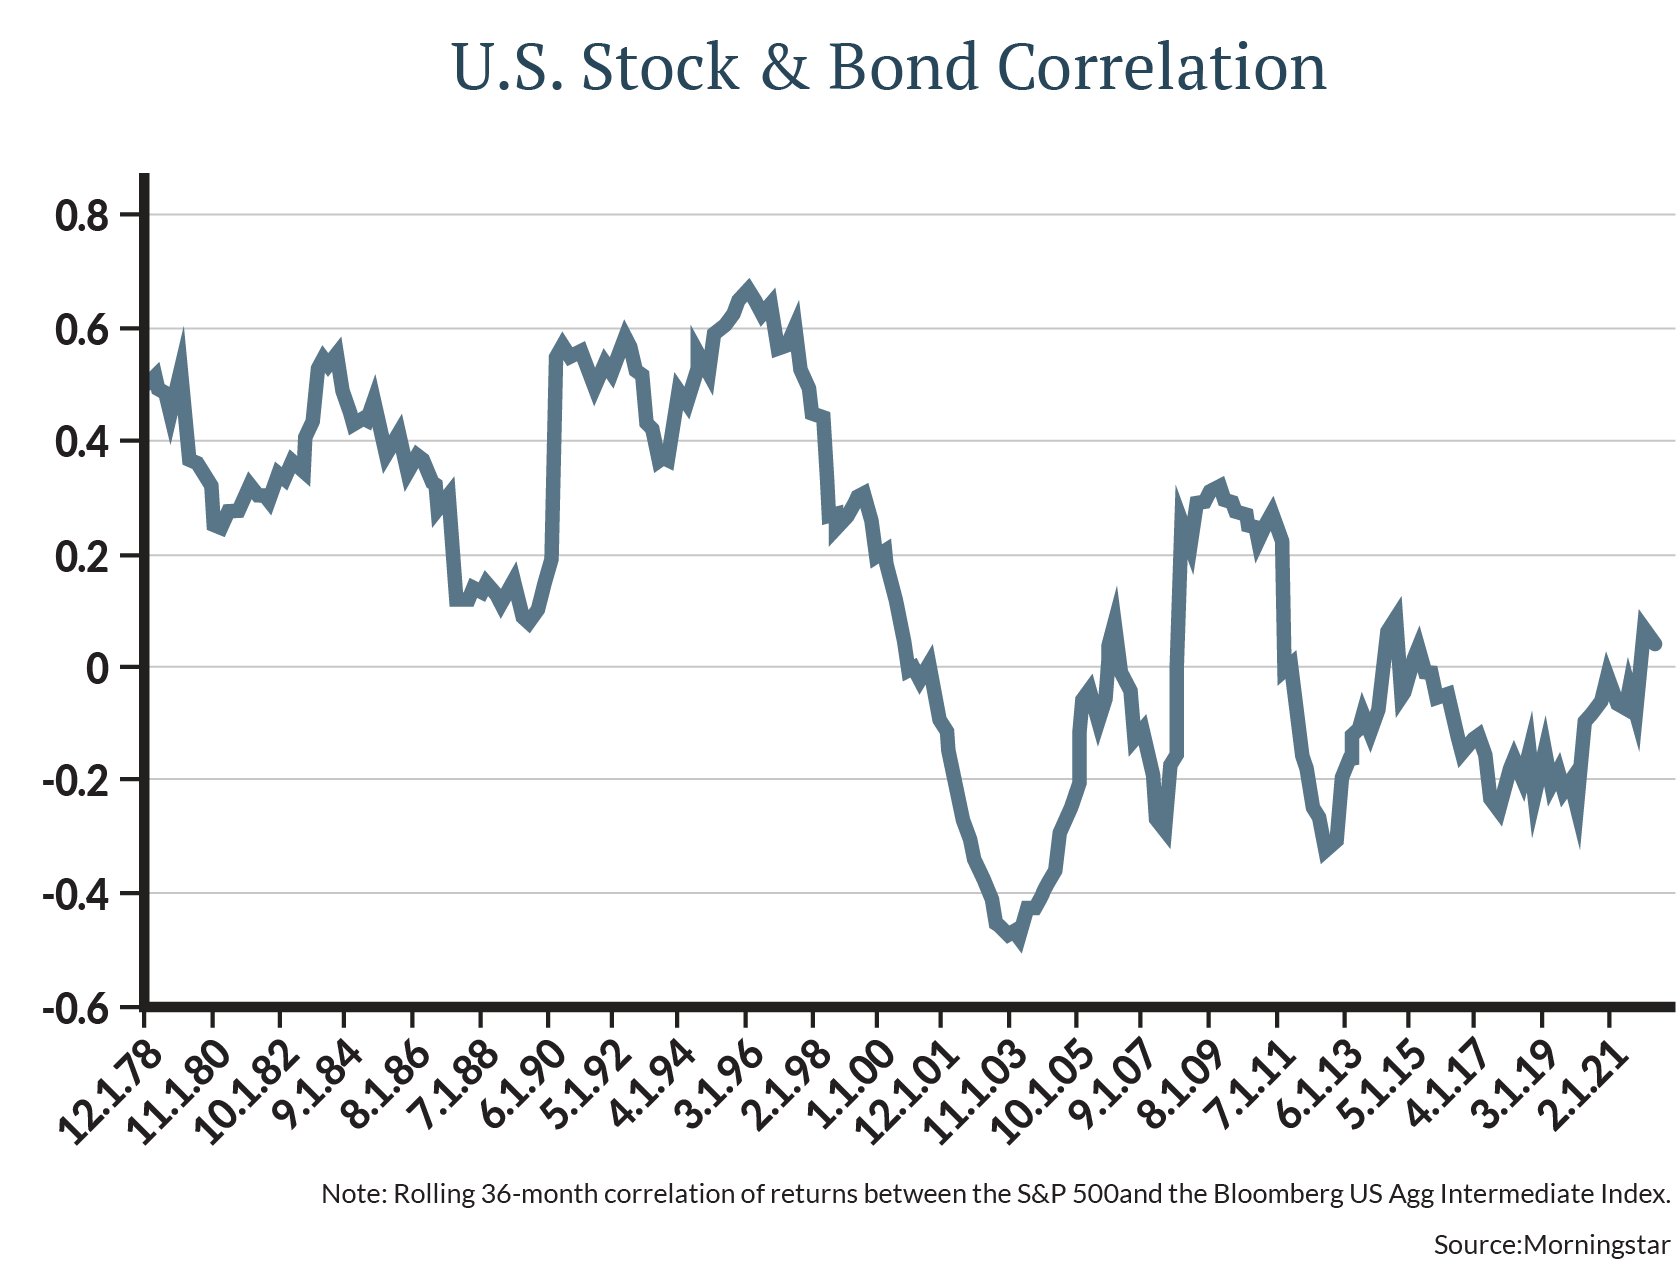 Consider the following chart:  •	Roughly speaking, the second half of the timeline shows low and typically negative correlations between returns of stocks and bonds. That’s what investors have now become accustomed to.  •	By contrast, the first half of the timeline—which begins in the late 1970s—shows much higher correlations. During that period, on average, the outcomes of stocks and bonds were, for better or worse, more closely aligned.